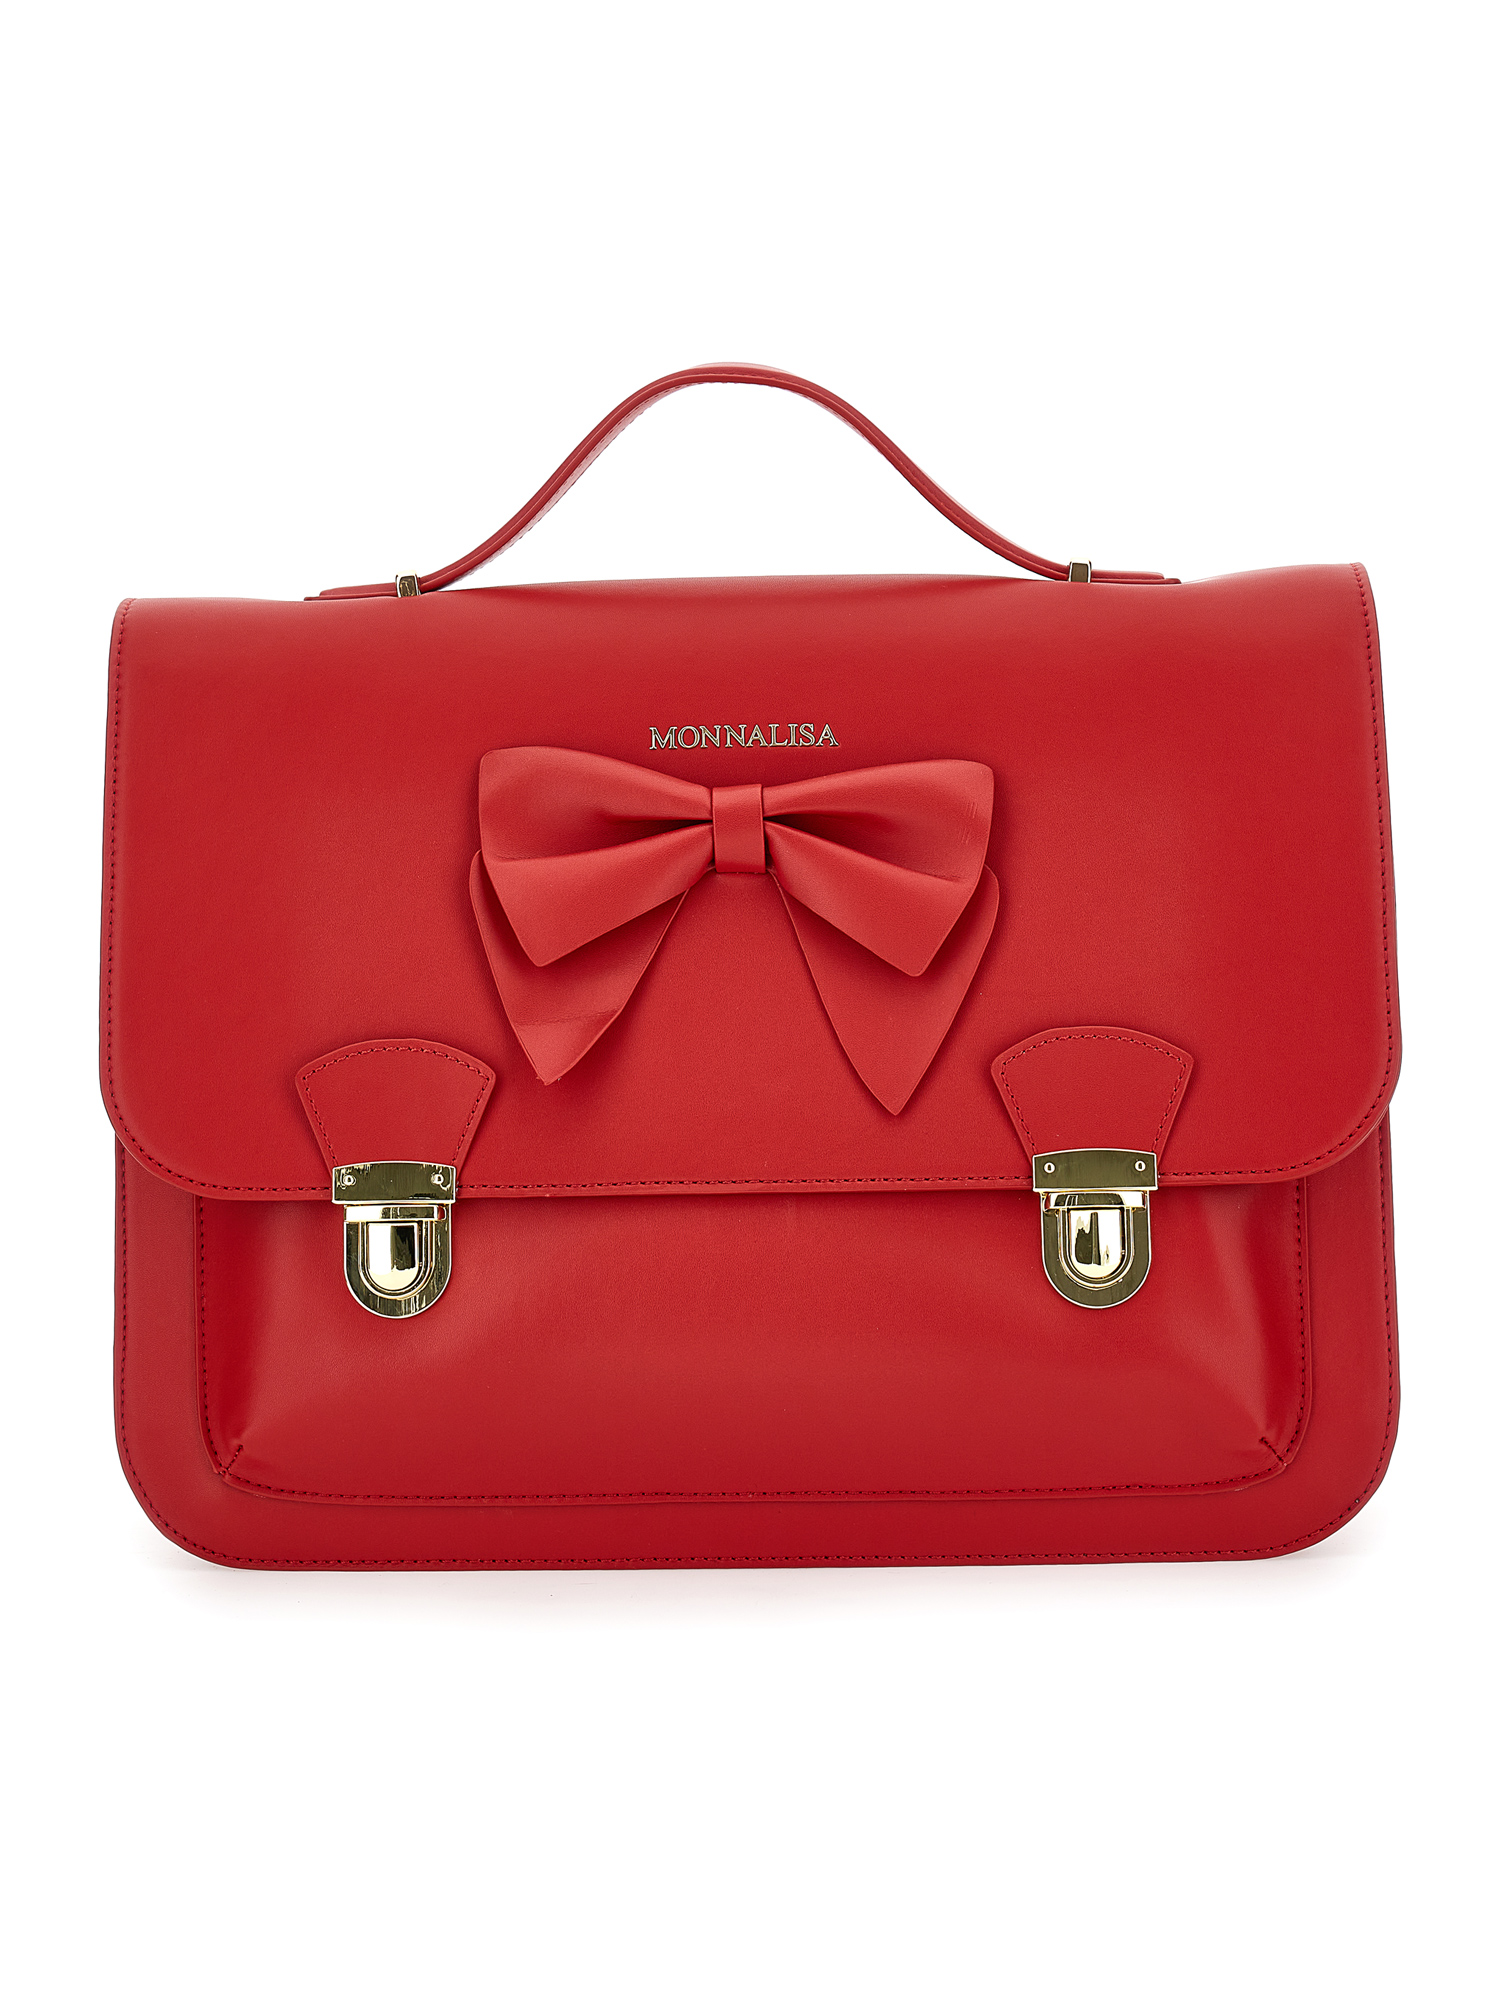 Monnalisa Regenerated Leather Satchel With Bow In Ruby Red